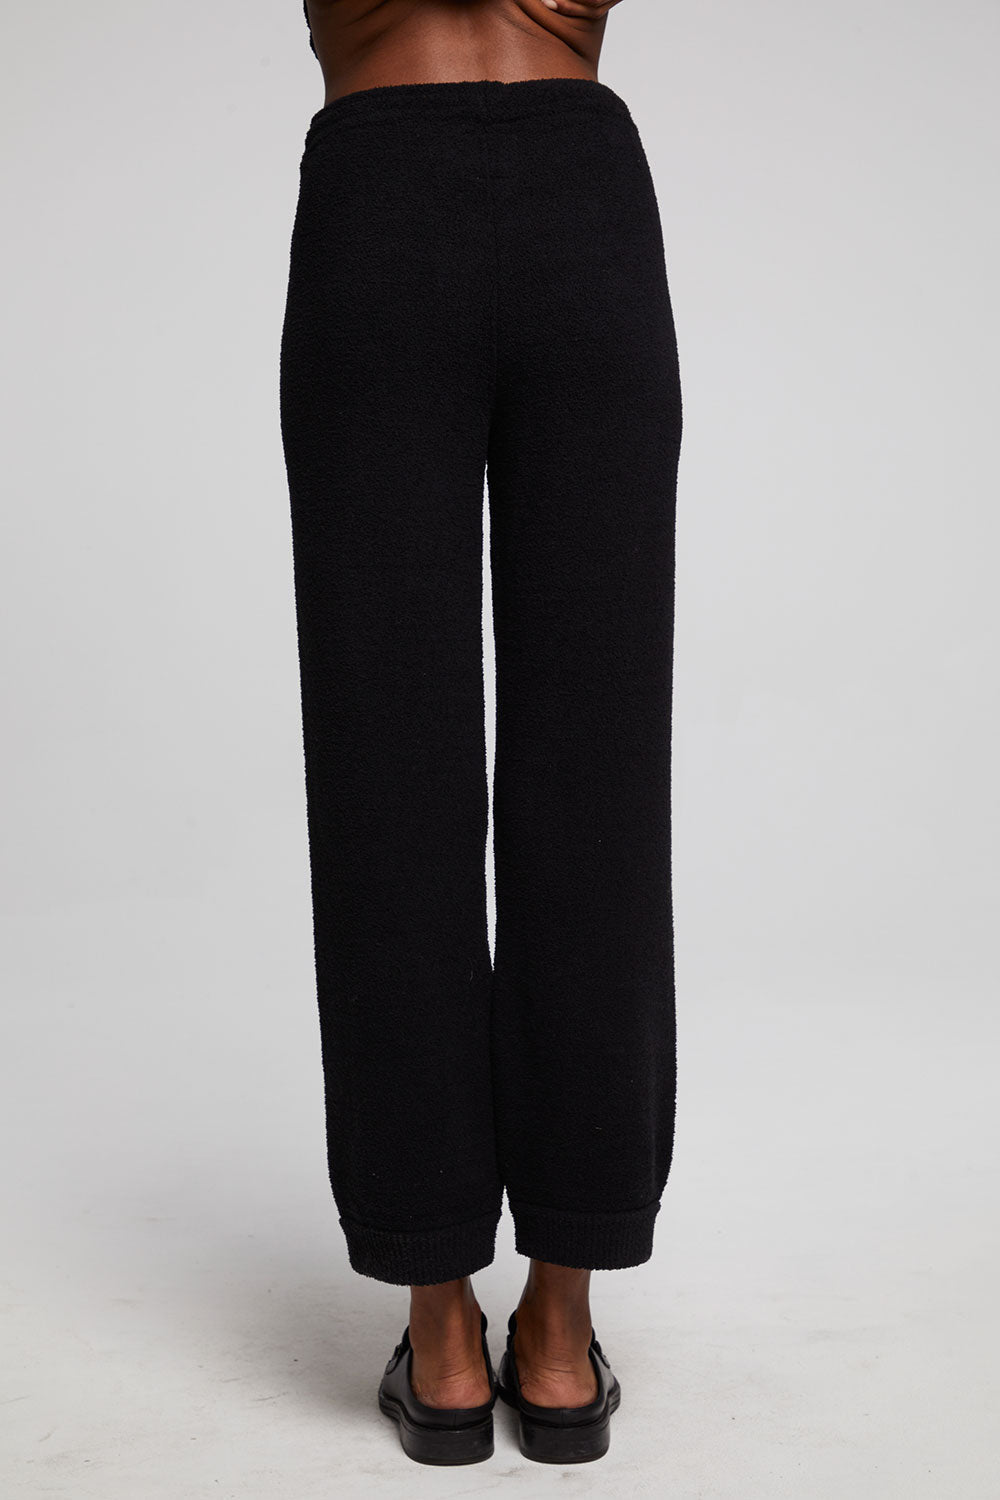 Chaser Weekend Licorice Jogger